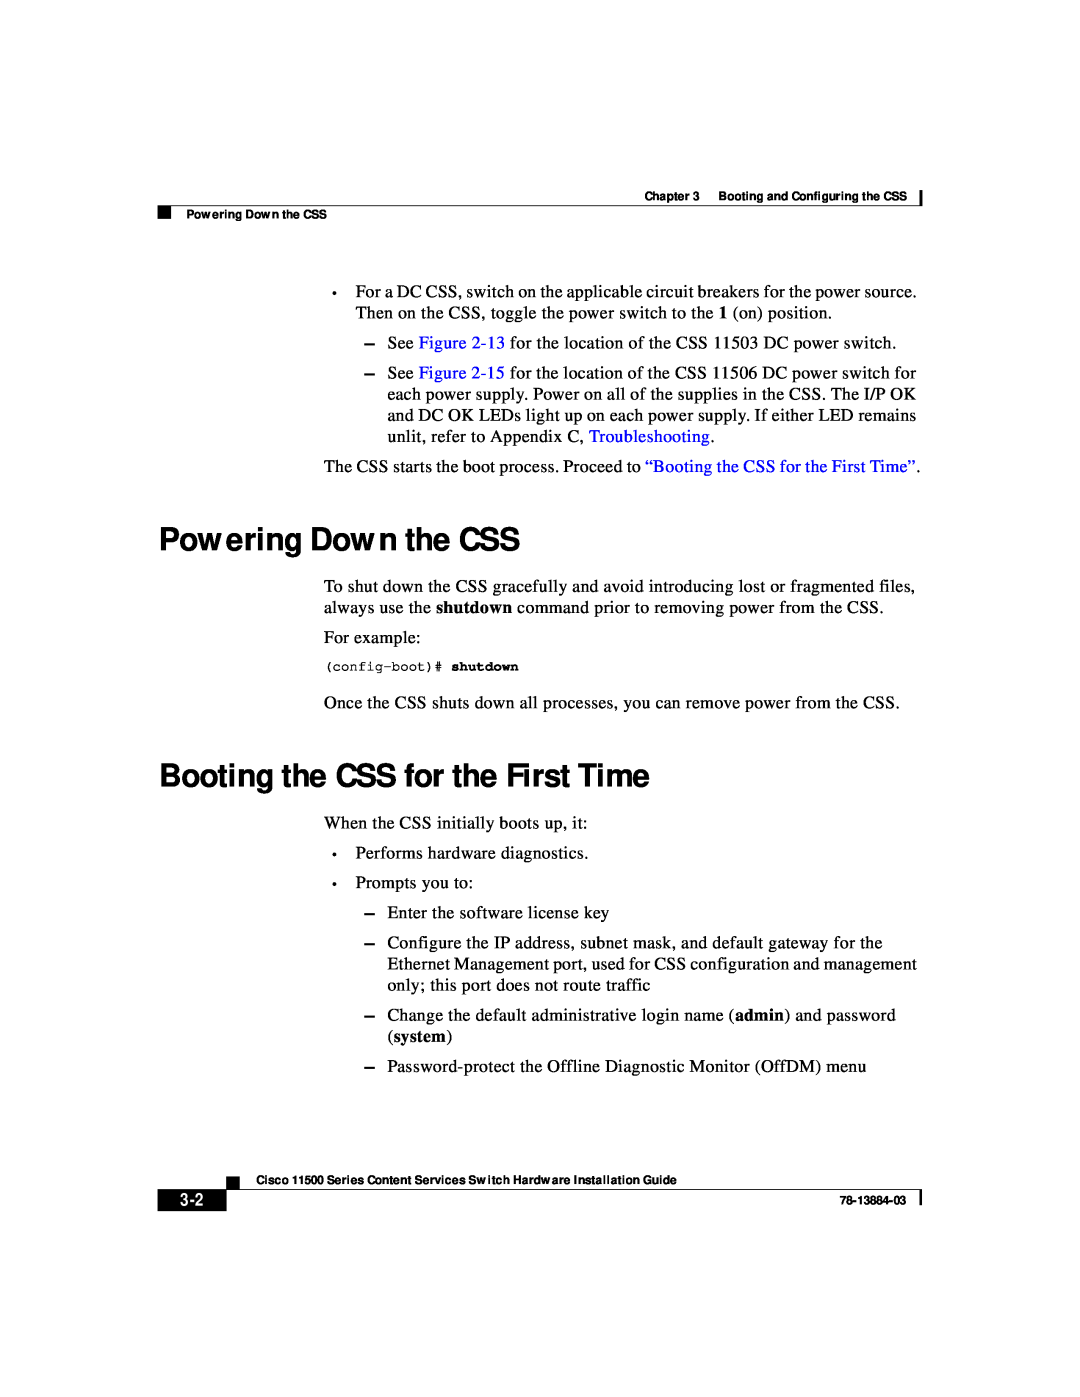 Cisco Systems 11500 Series manual Powering Down the CSS, Booting the CSS for the First Time 